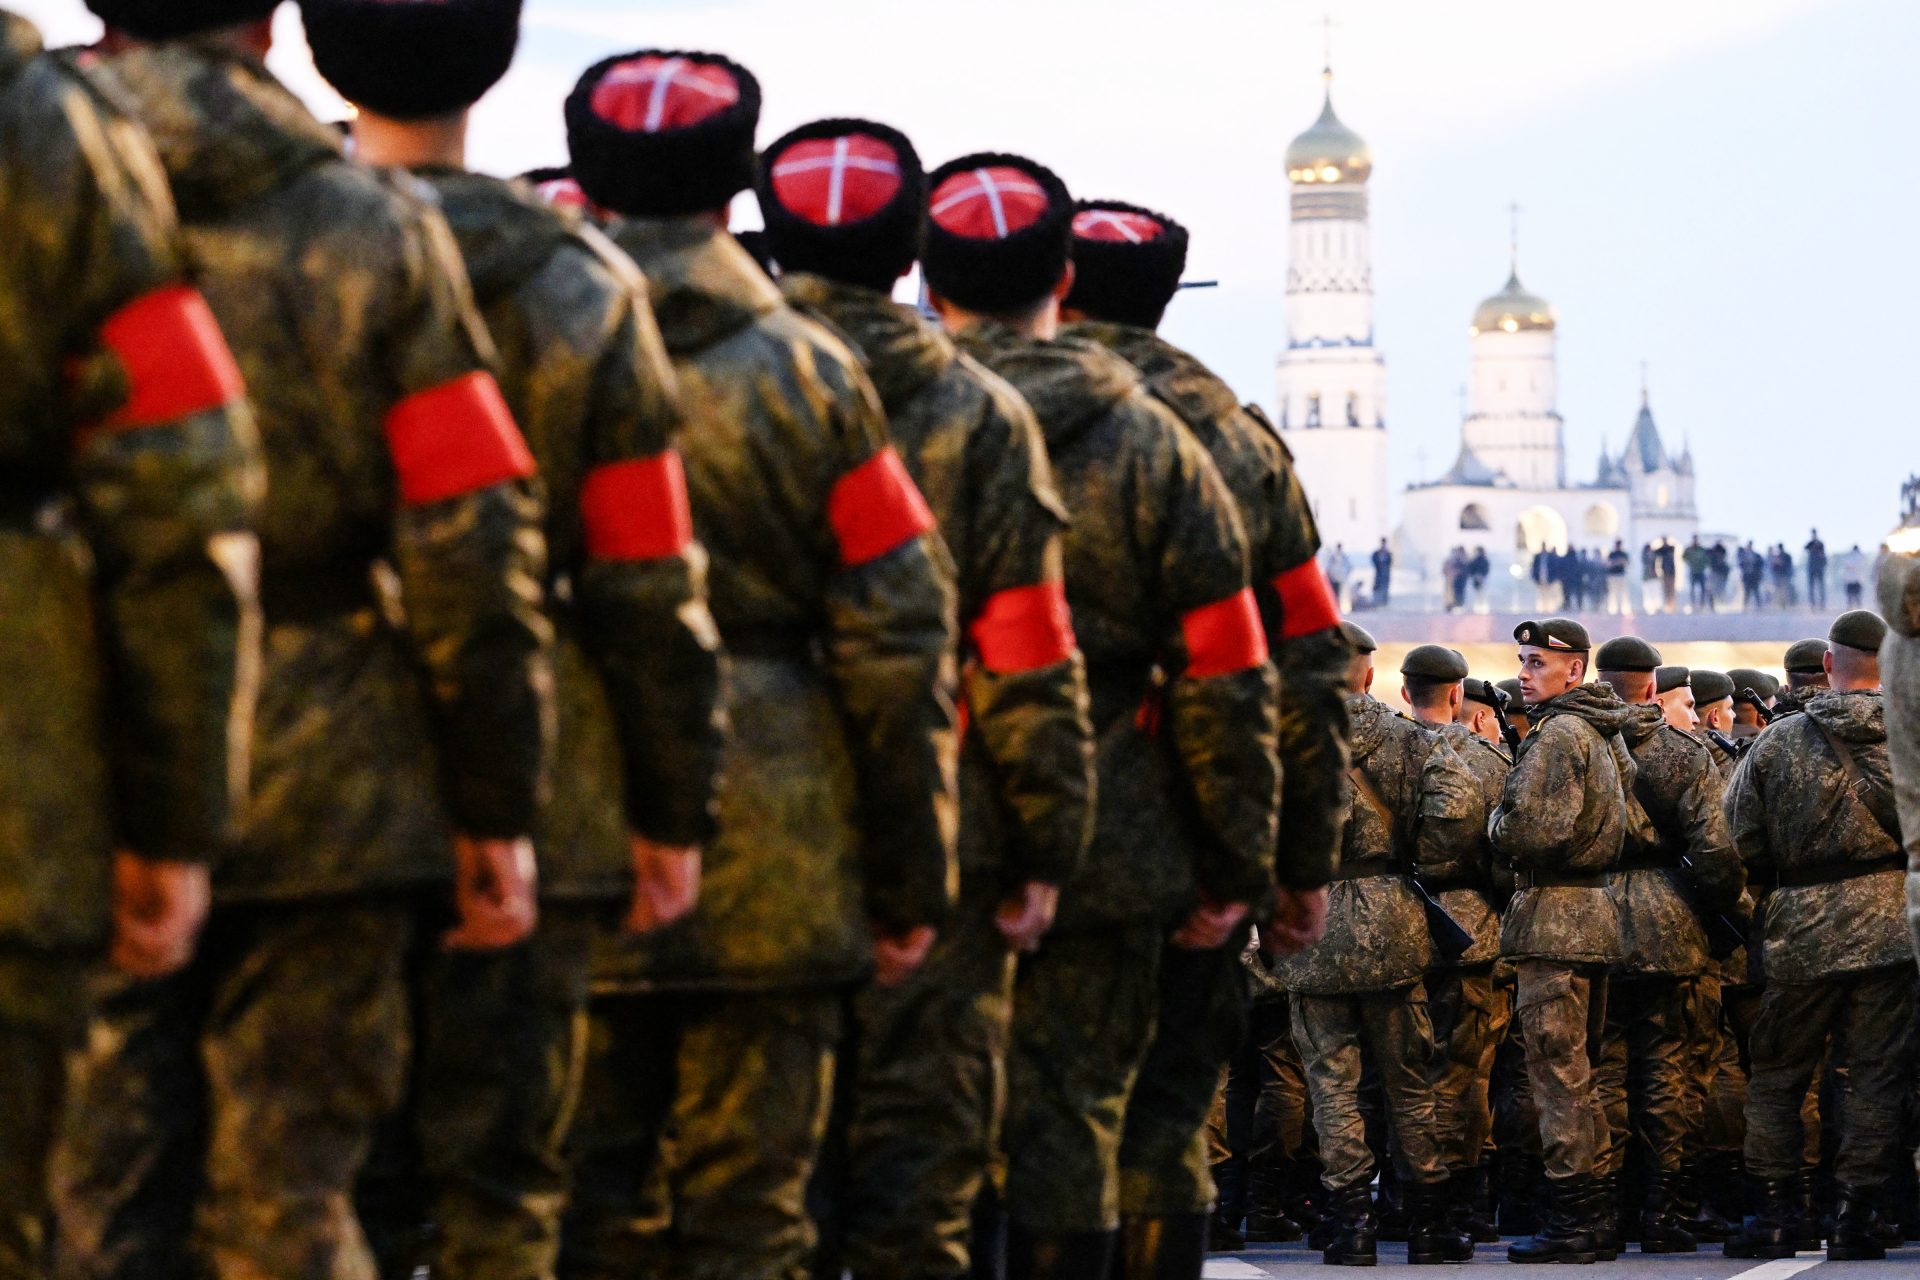 Putin signs a decree adding 150,000 new troops to the Russian Armed Forces